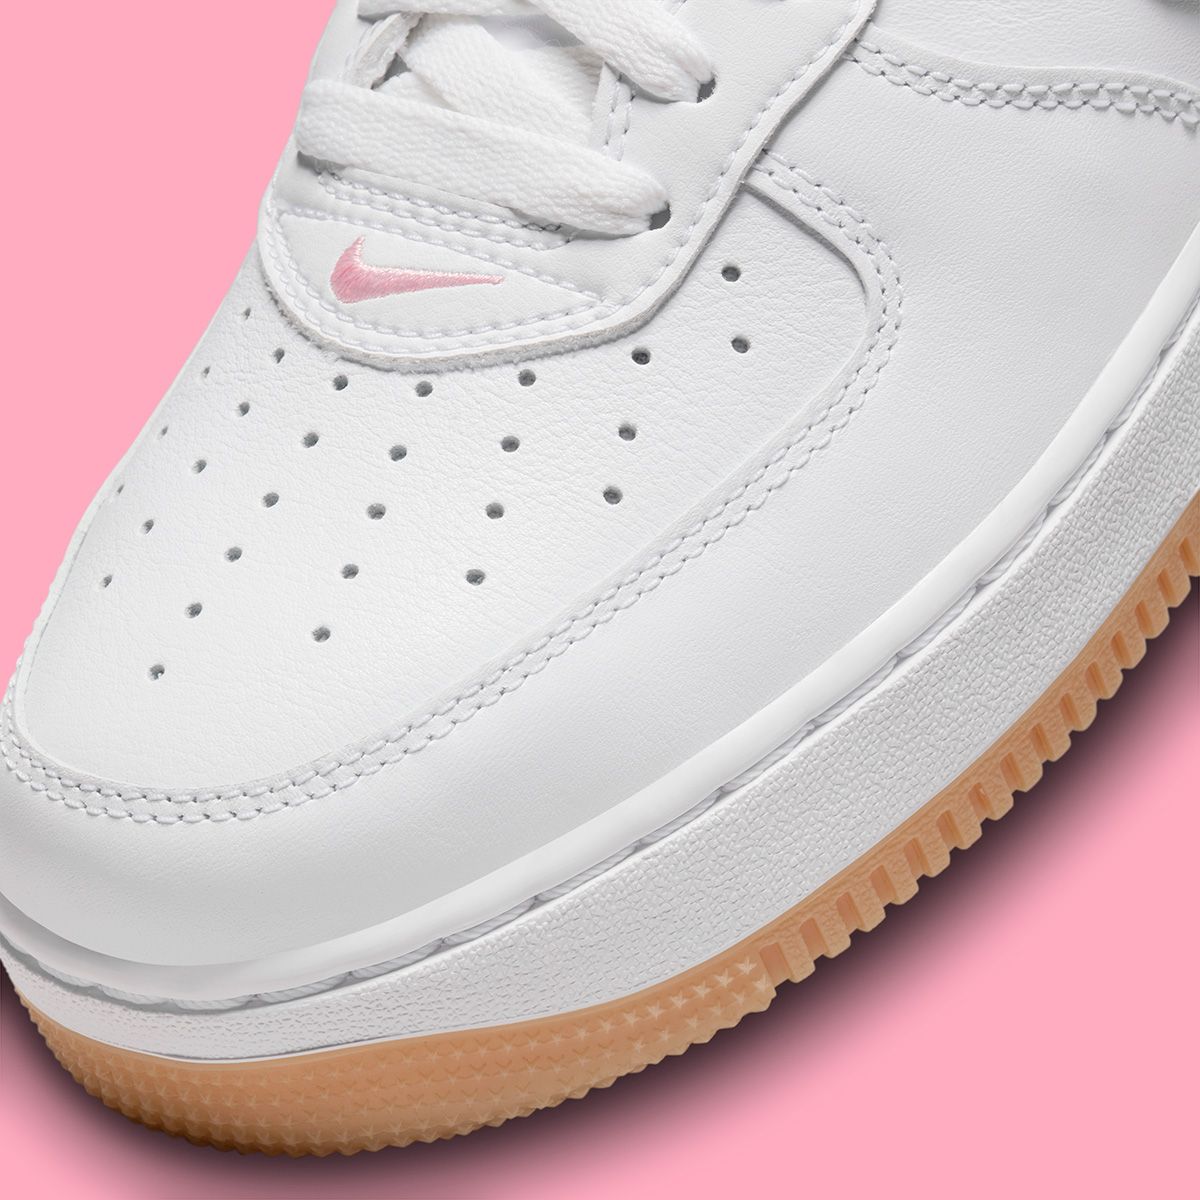 Air Force 1 Low Since 82 Pink Gum